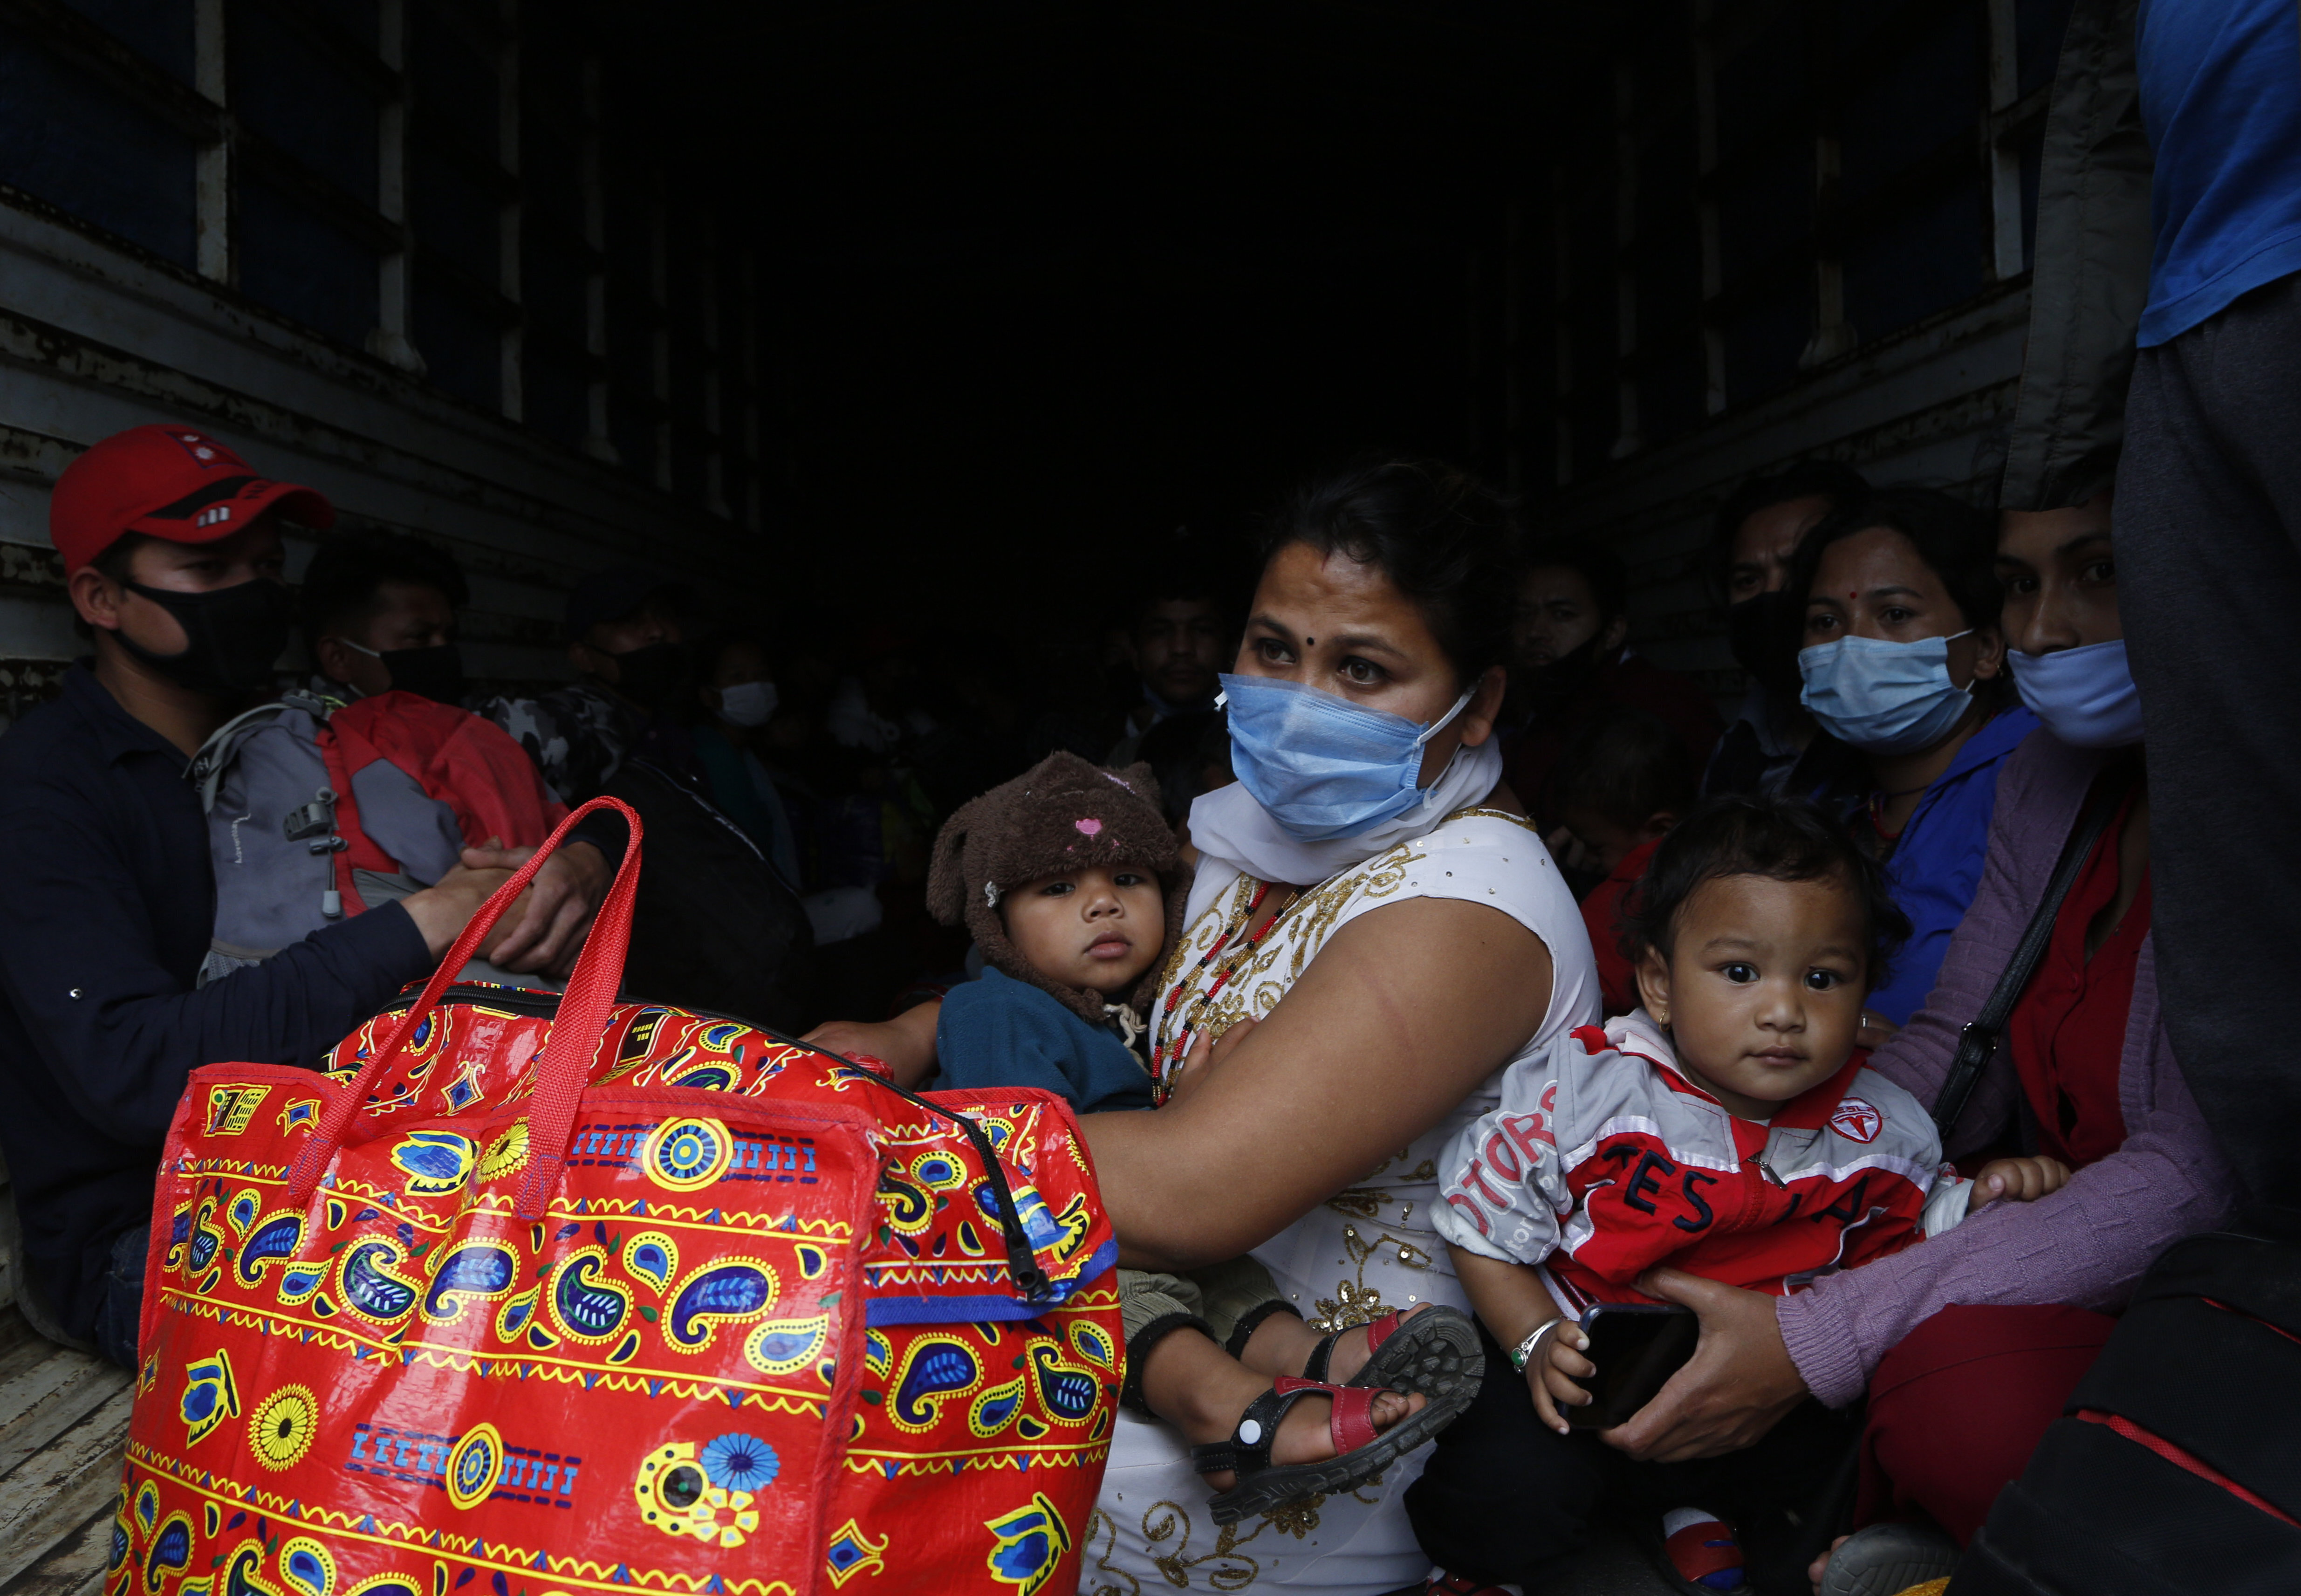 Stranded Nepalese people get ready to travel back to their village on the back of a truck, during lockdown to prevent the spread of the new coronavirus in Bhaktapur, Nepal, Monday, April 20, 2020. The supreme court passed an interim order on Friday instructing the Nepalese government to ensure free transportation for stranded daily wage workers and others making the long journey back to their respective villages on foot. (AP Photo/Niranjan Shrestha)